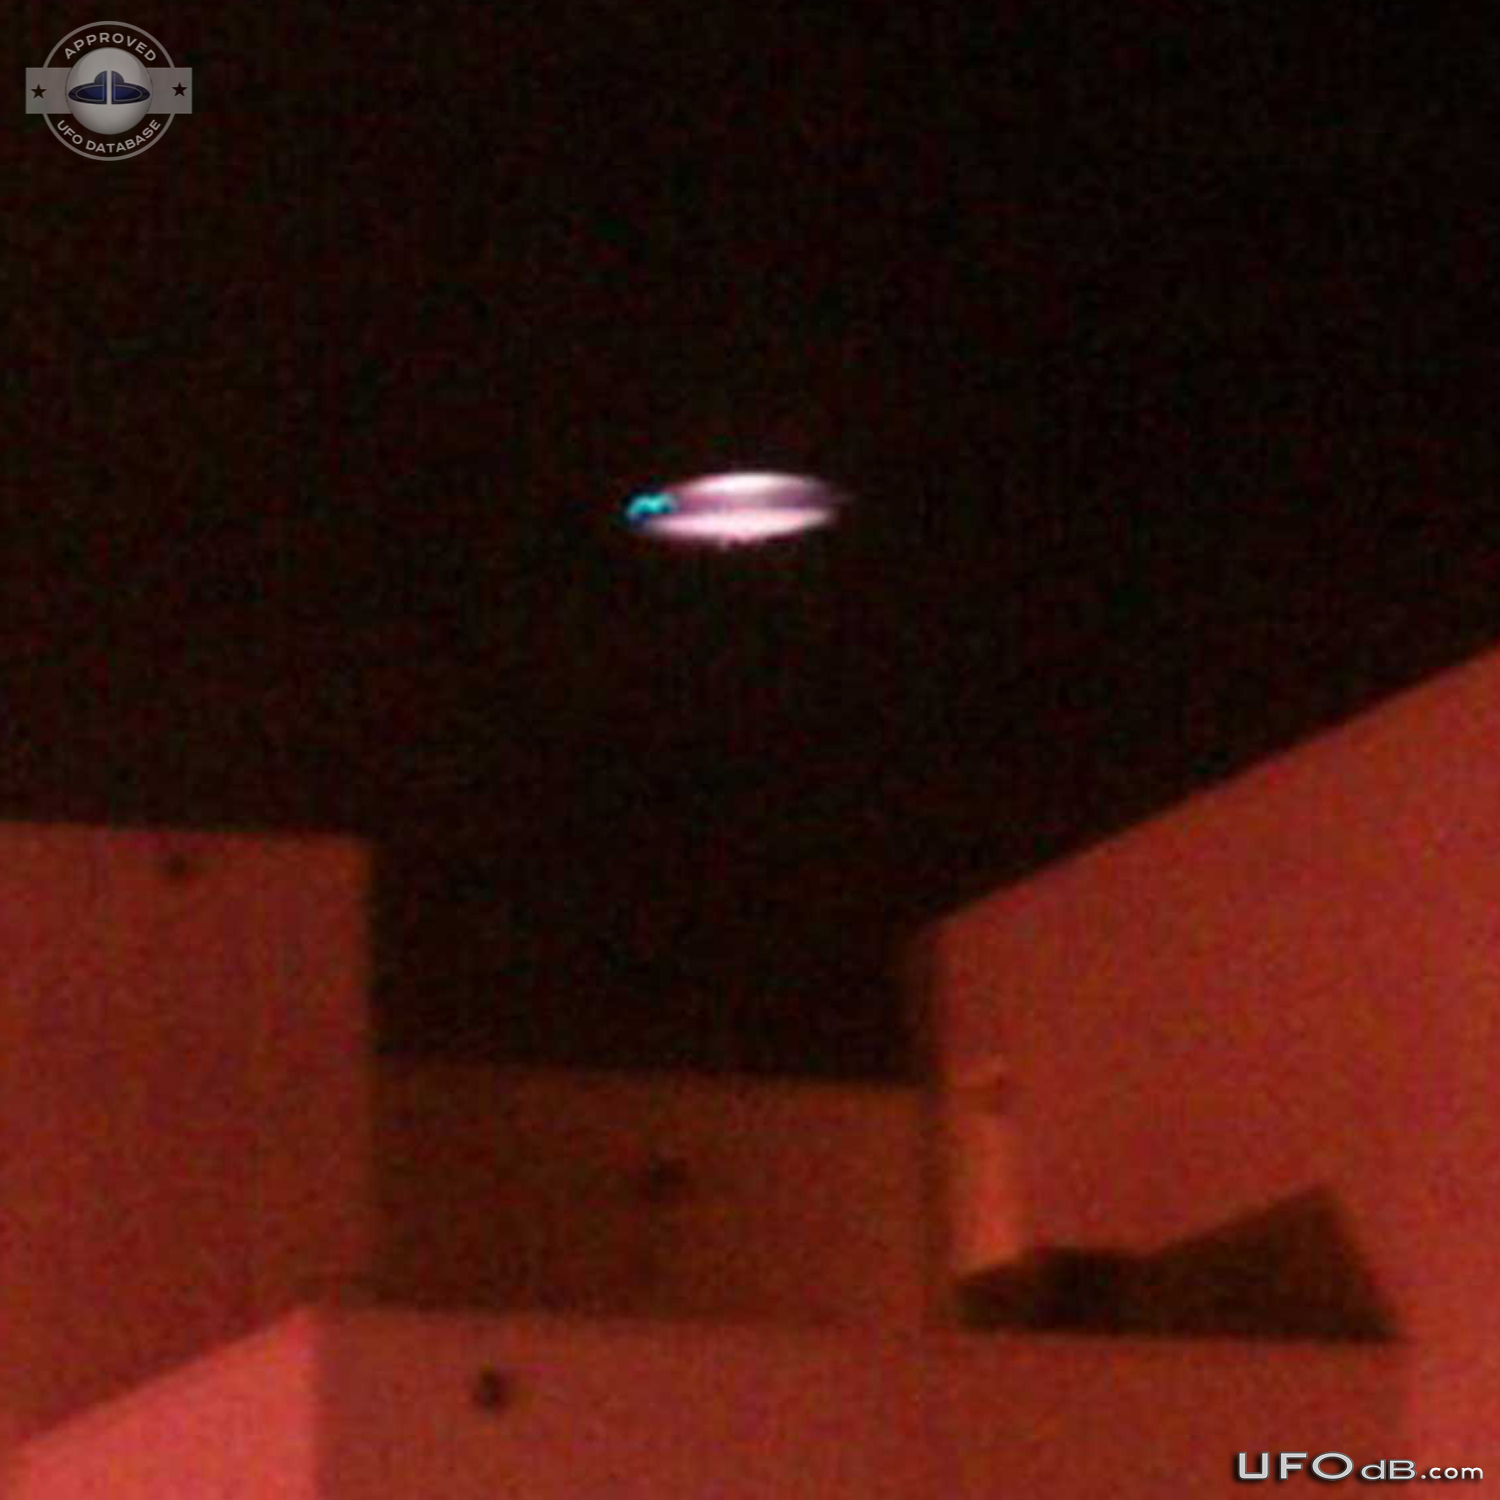 Clear Picture of UFO taken in the night Los Angeles, California | 2012 UFO Picture #397-2